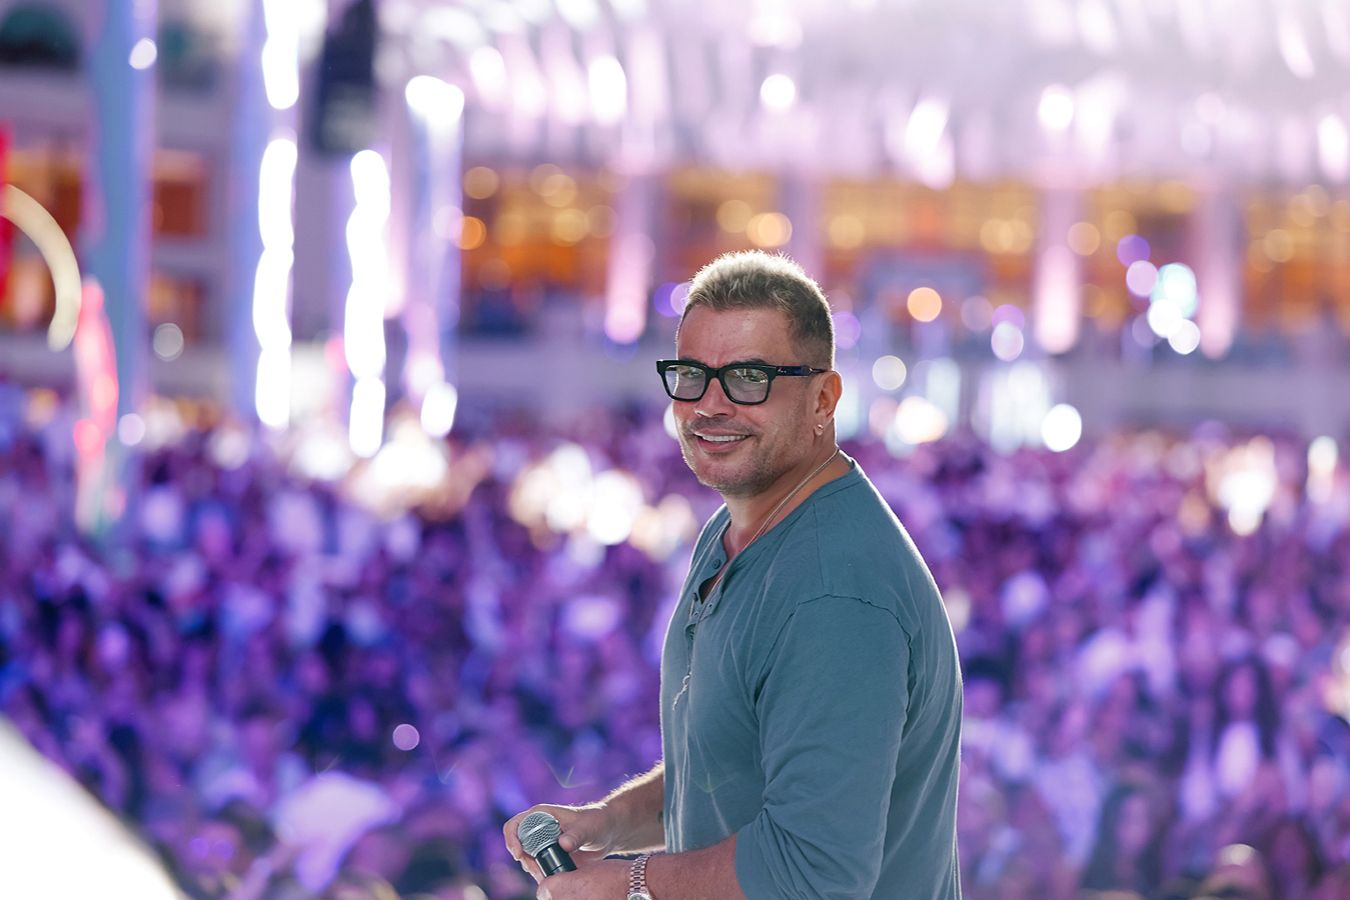 Amr Diab's phenomenal musical journey from Port Said to global stardom